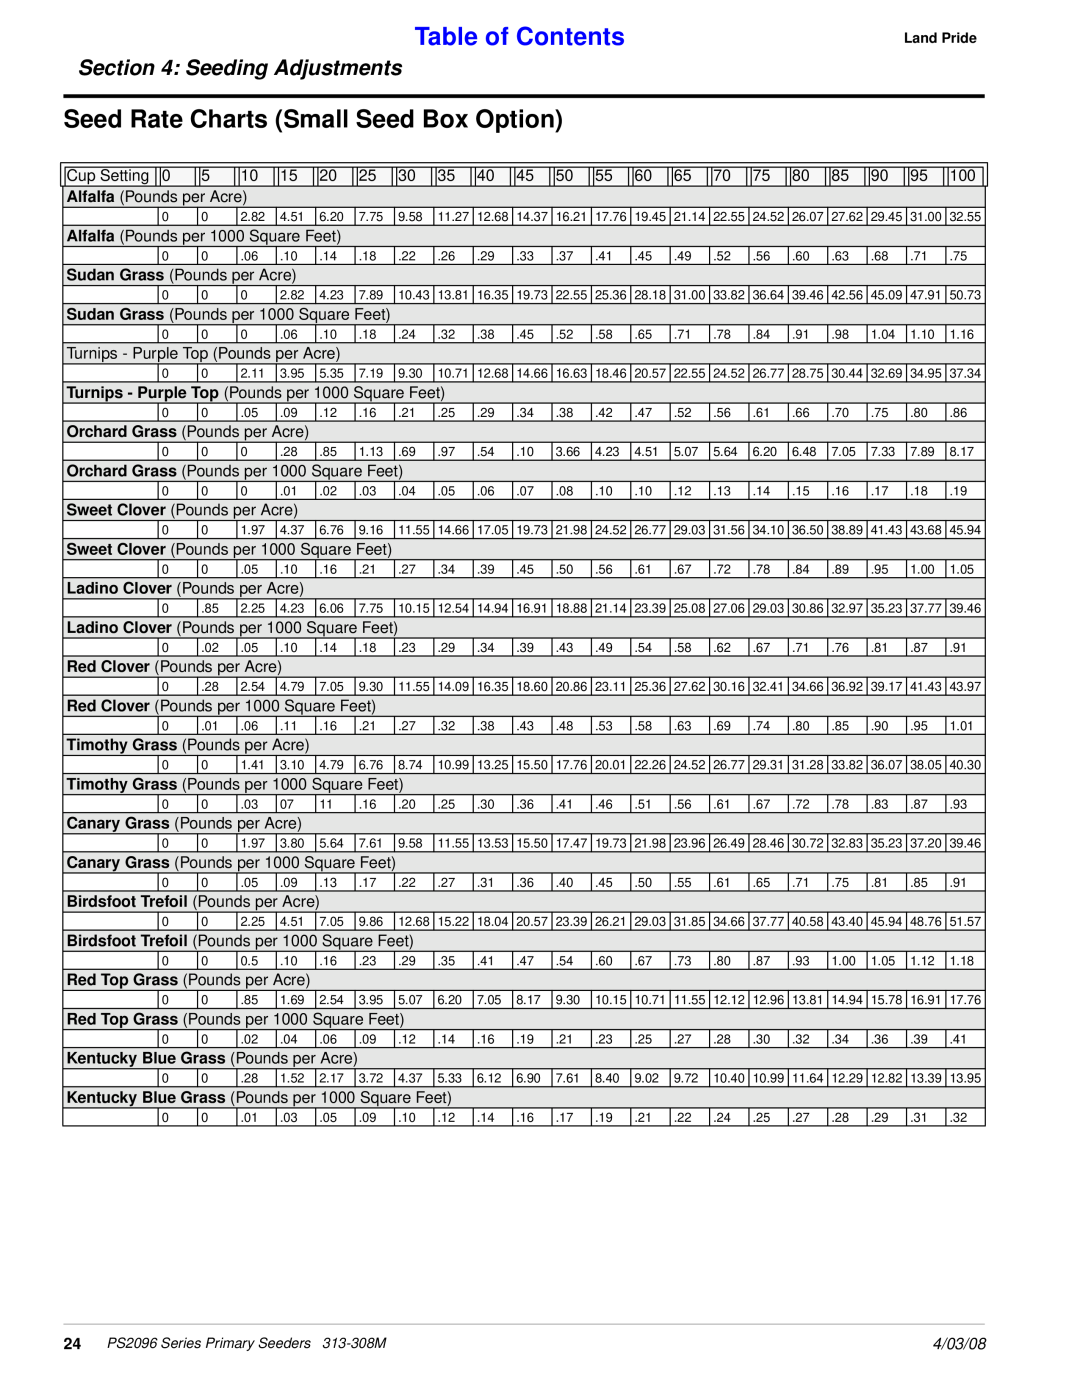 Land Pride 313-308M manual Seed Rate Charts Small Seed Box Option, Table of Contents, Seeding Adjustments, 4/03/08 